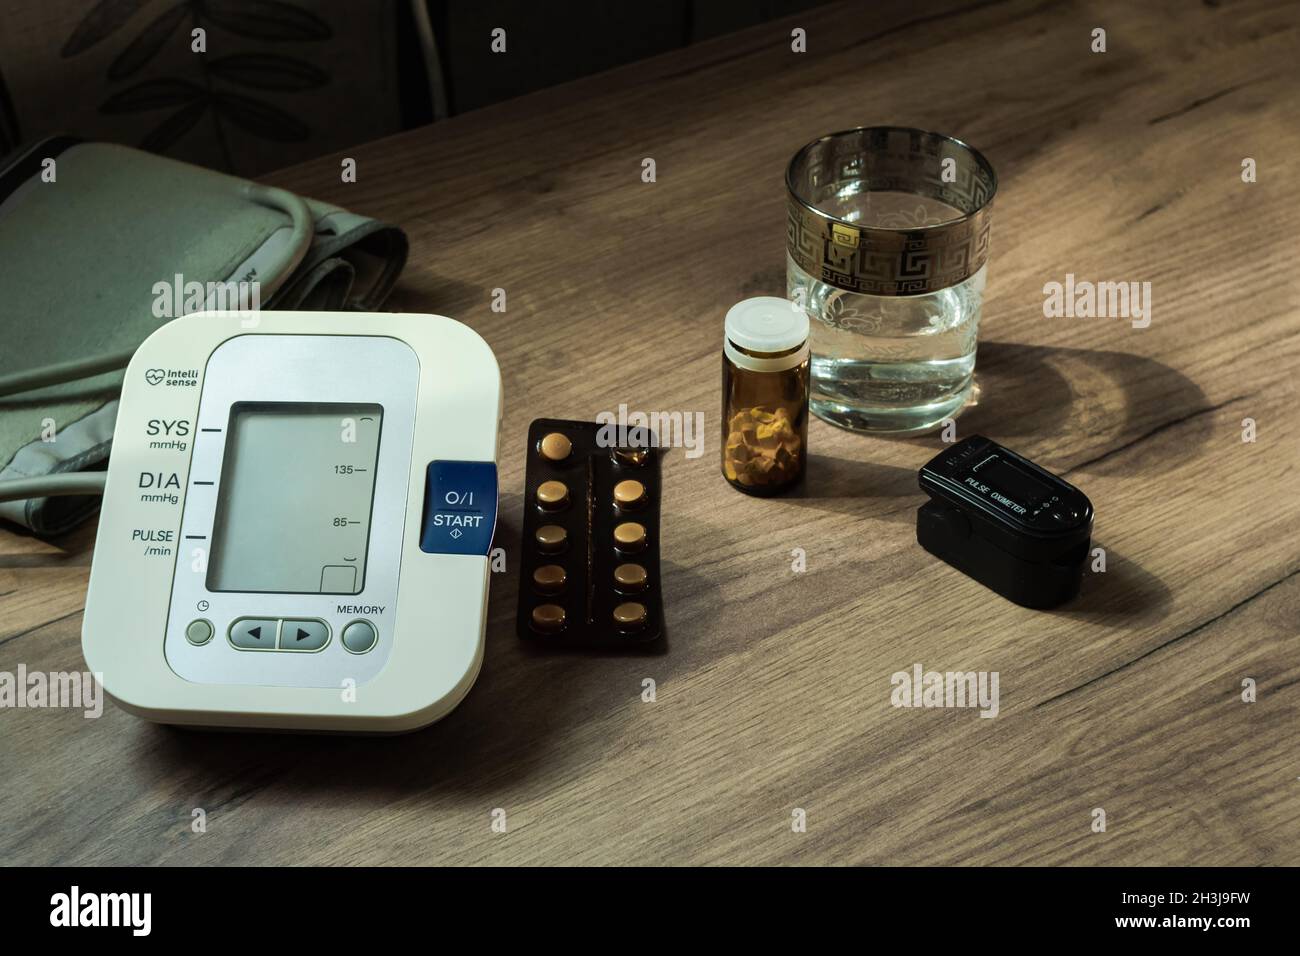 On a wooden table there is an automatic tonometer, a glass of water, pills, and an oxyometer. Health Concept Stock Photo